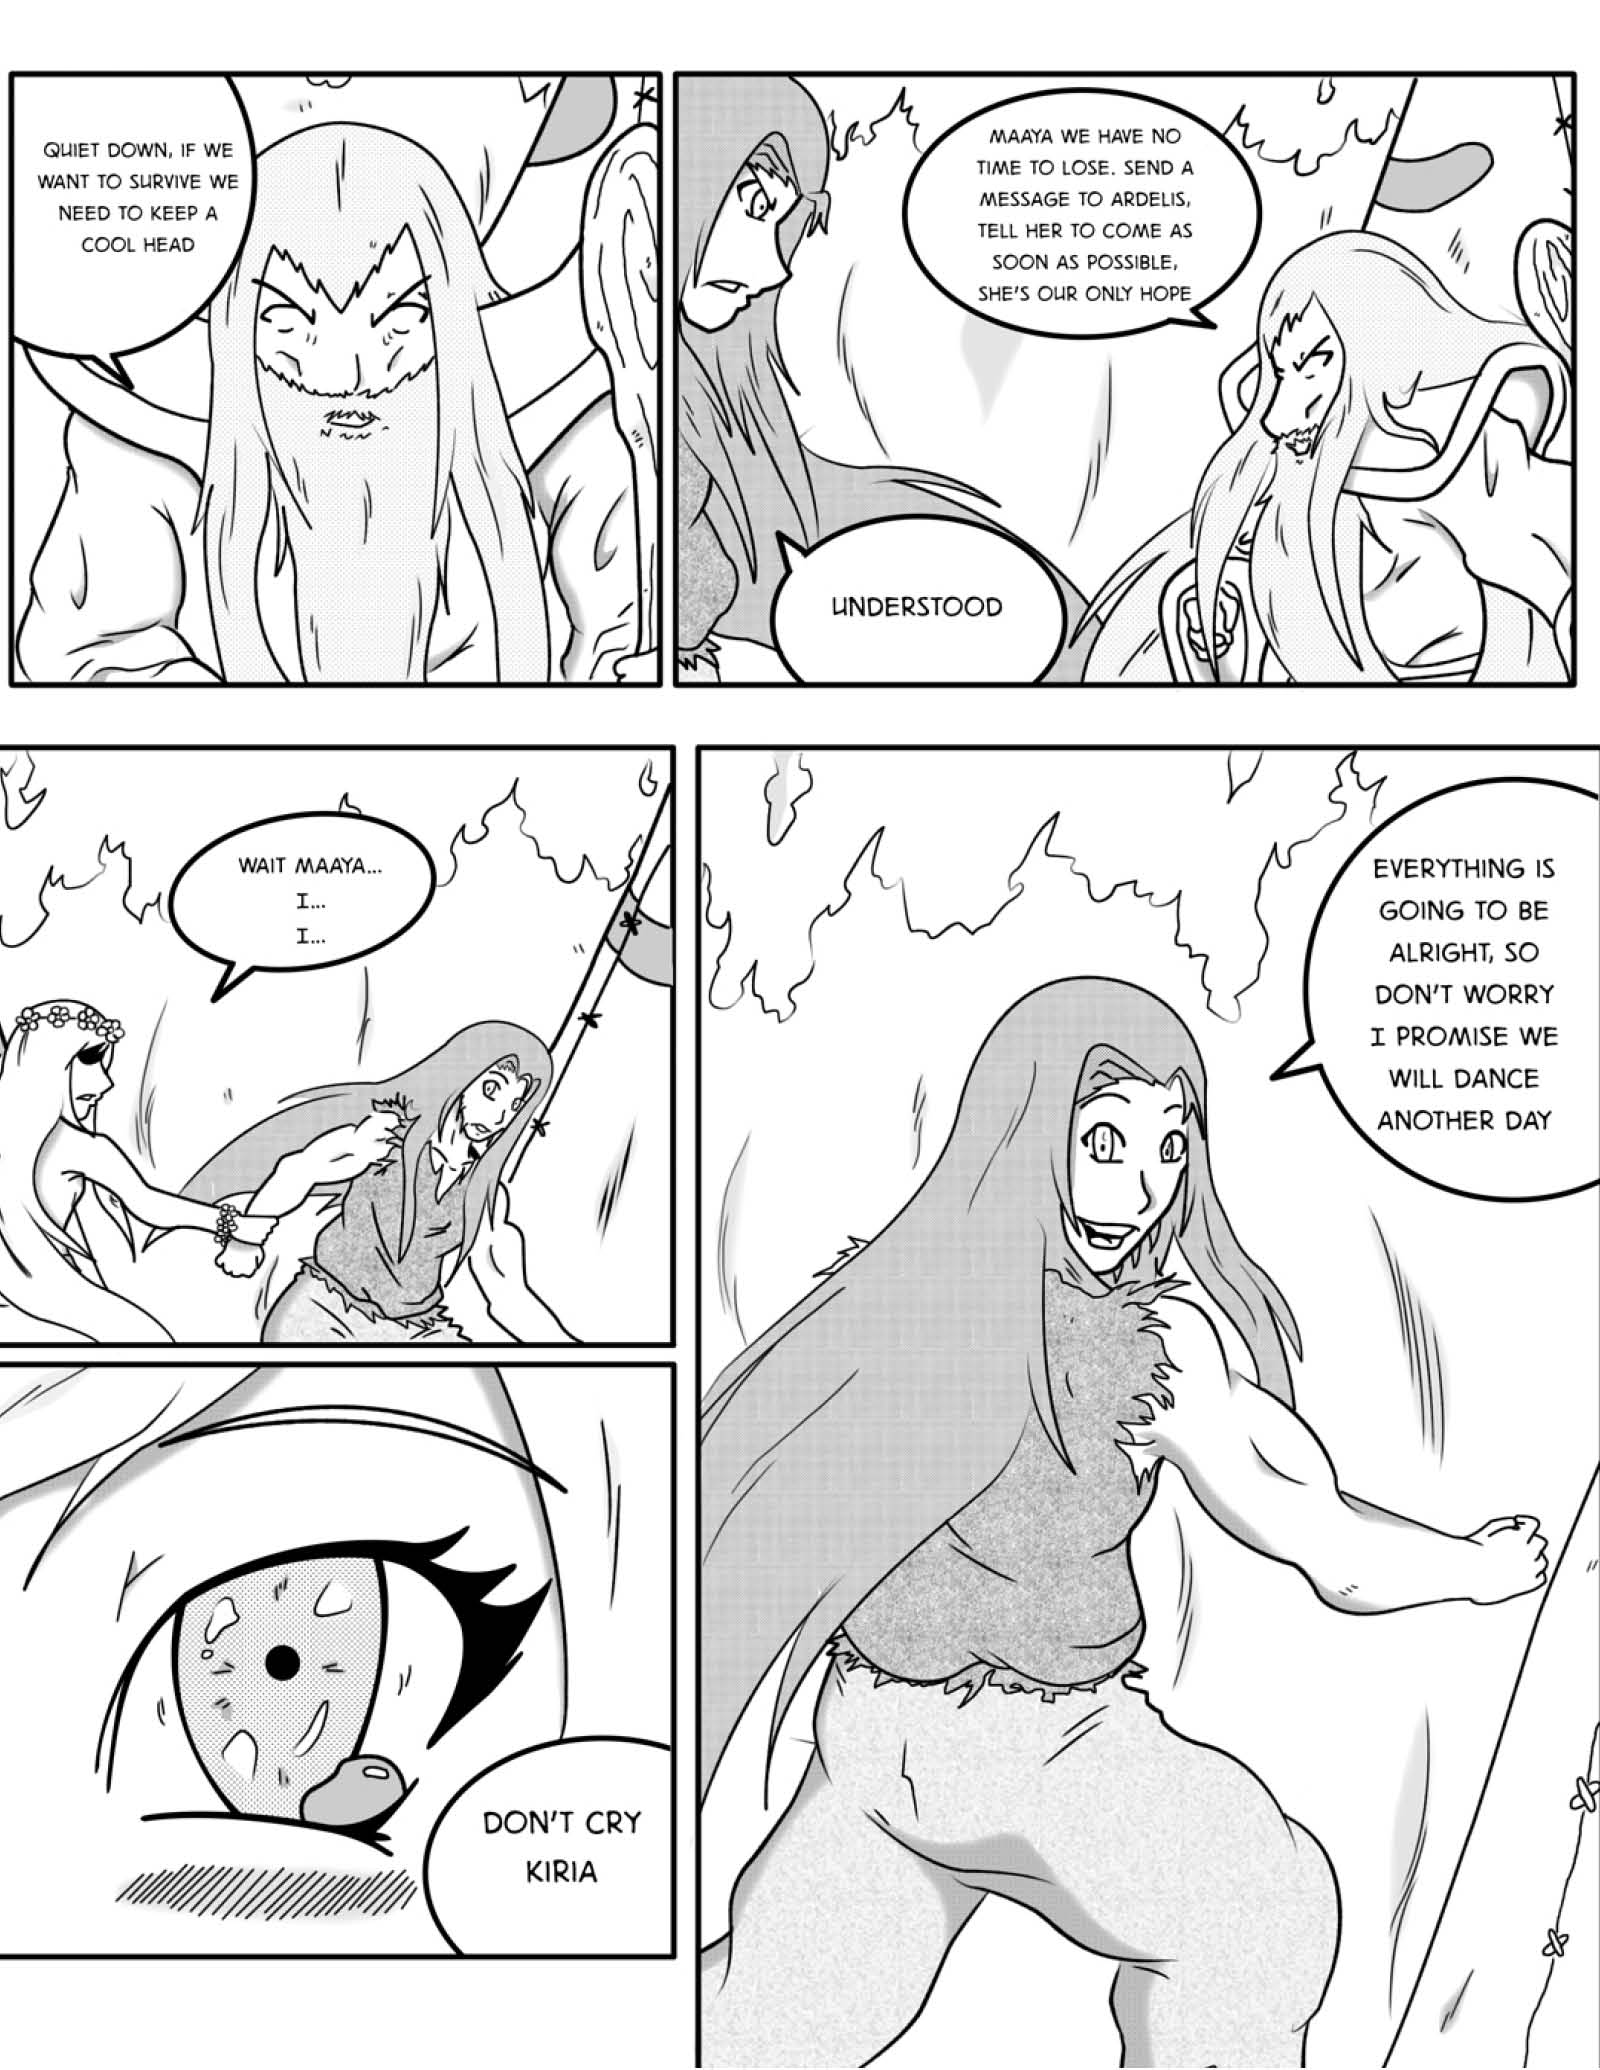 Series Dilan: the Chronicles of Covak - Chapter 1 - Page 17 - Language ENG